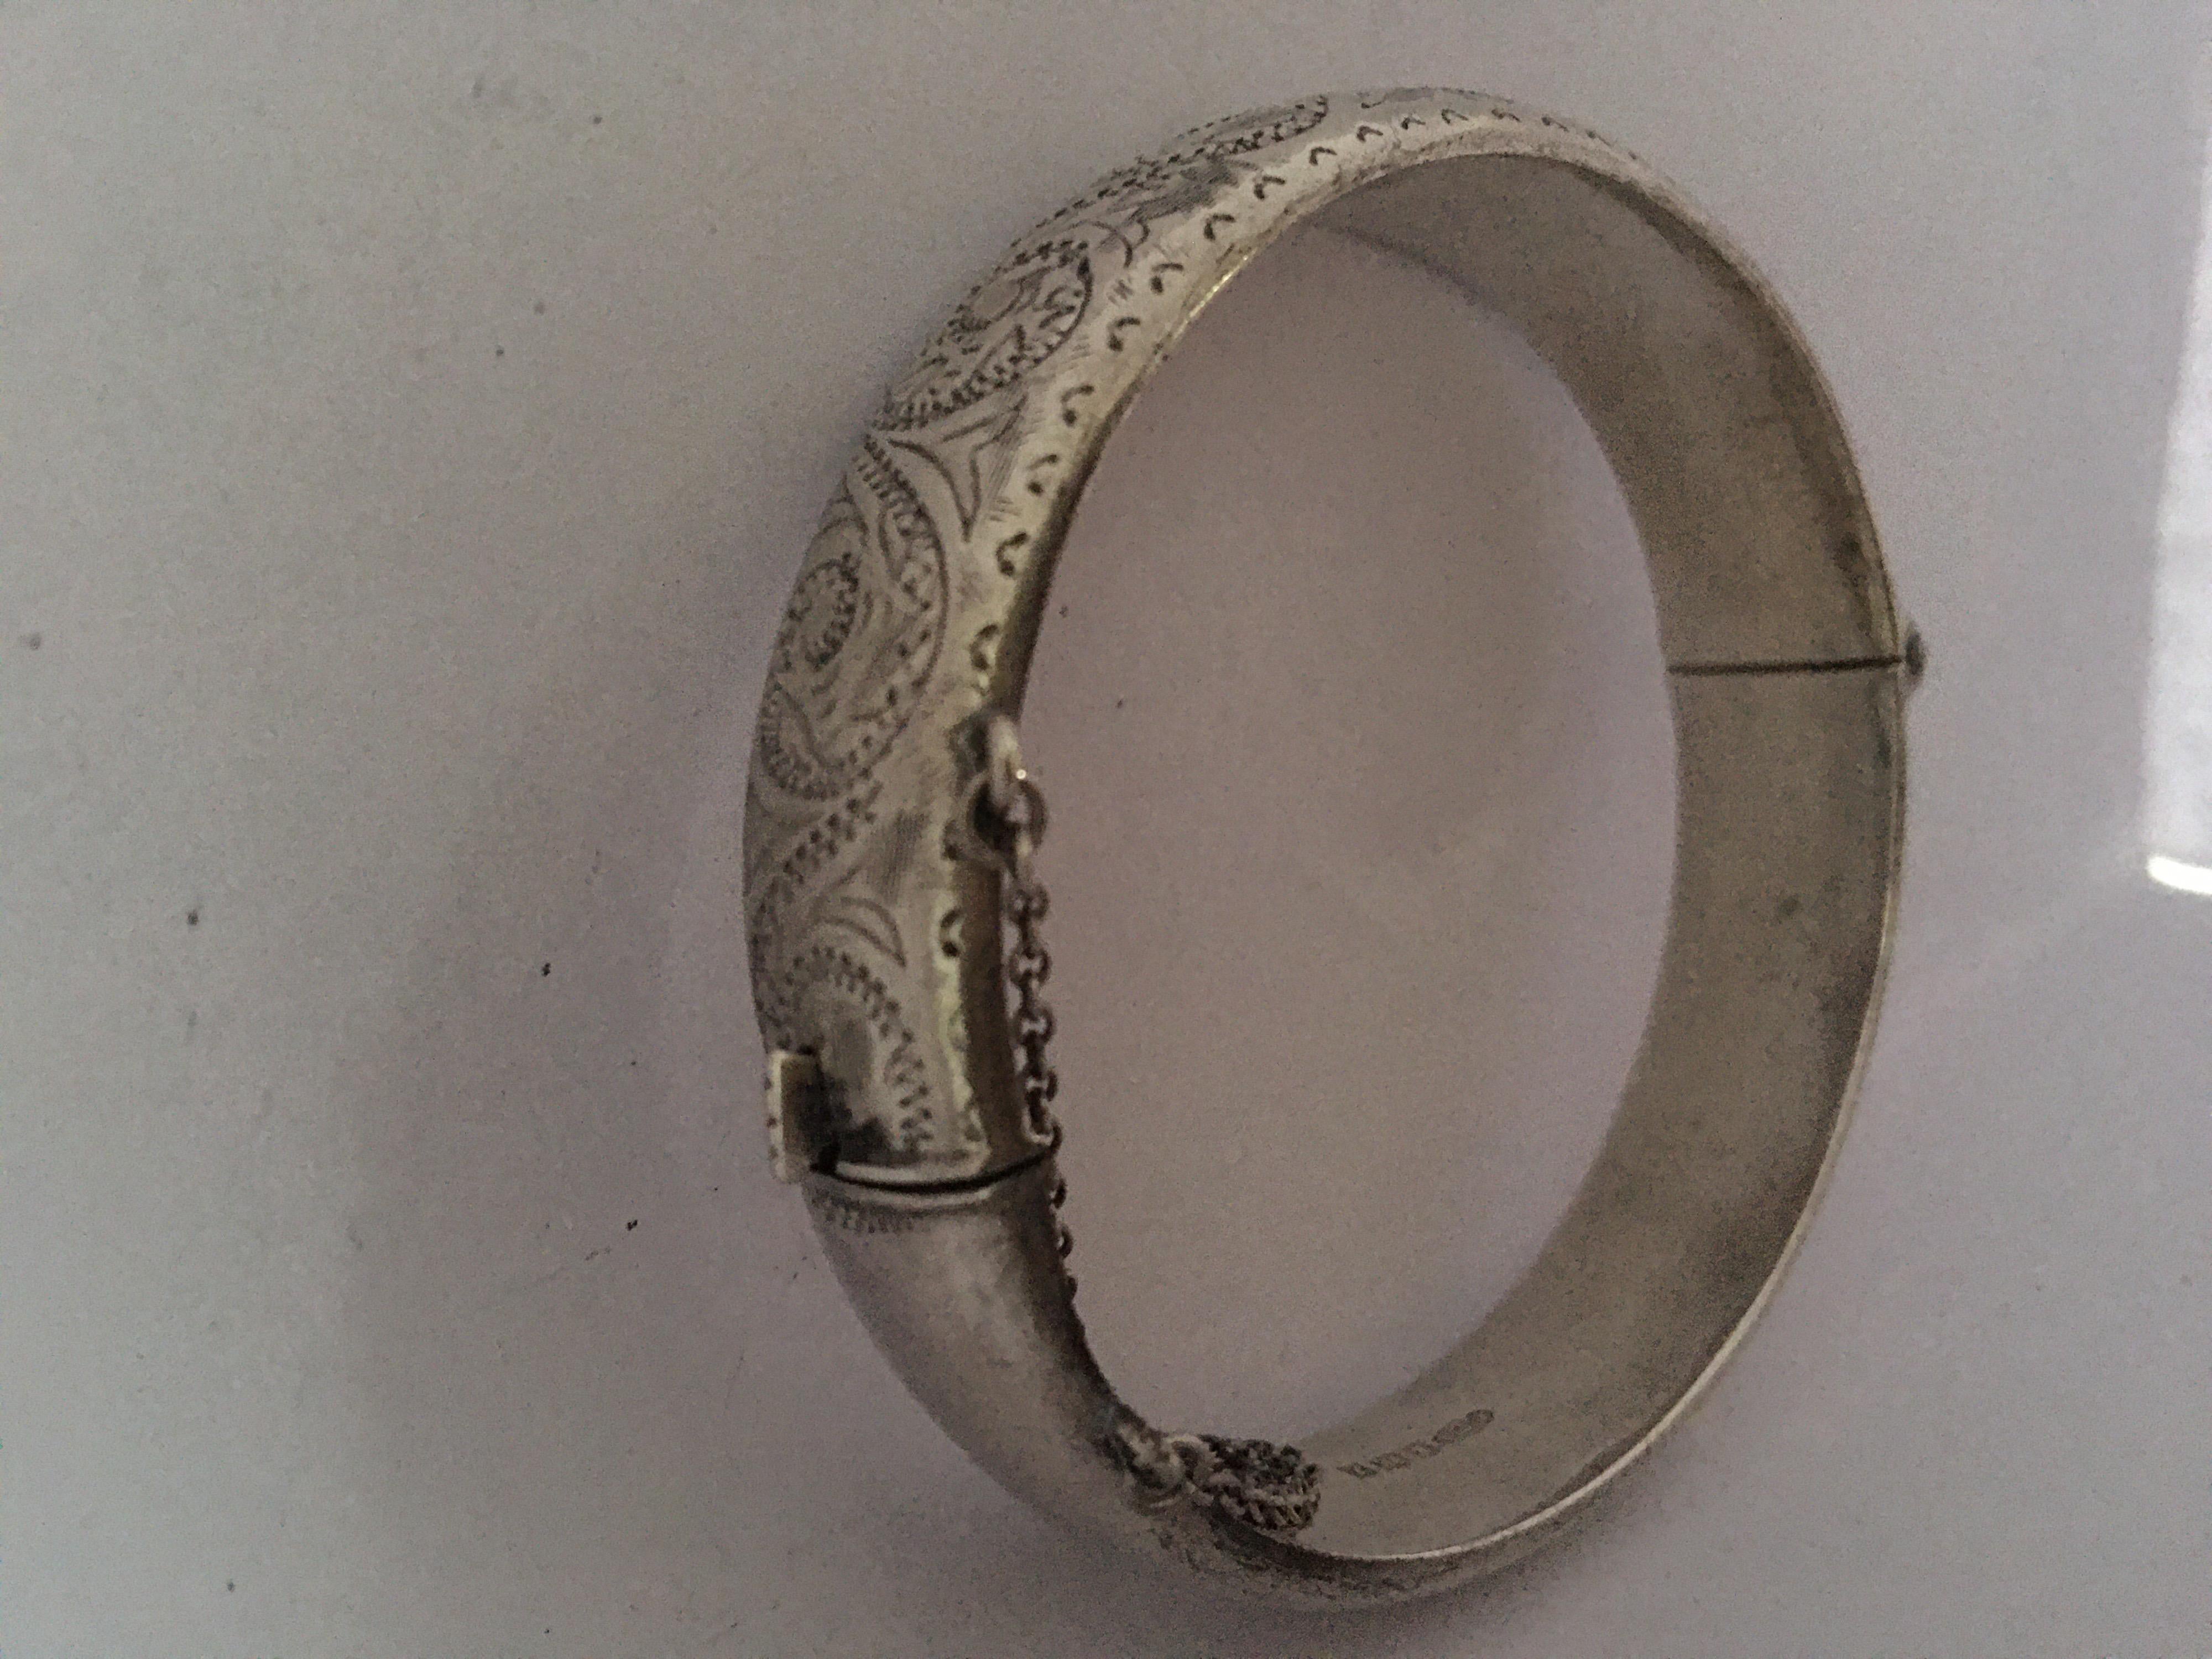 This beautiful pre-owned antique silver bangle is in good wearable condition. Visible signs of ageing and wear with light marks and dents on the outer layer as shown. Please study the images carefully as form part of the description.